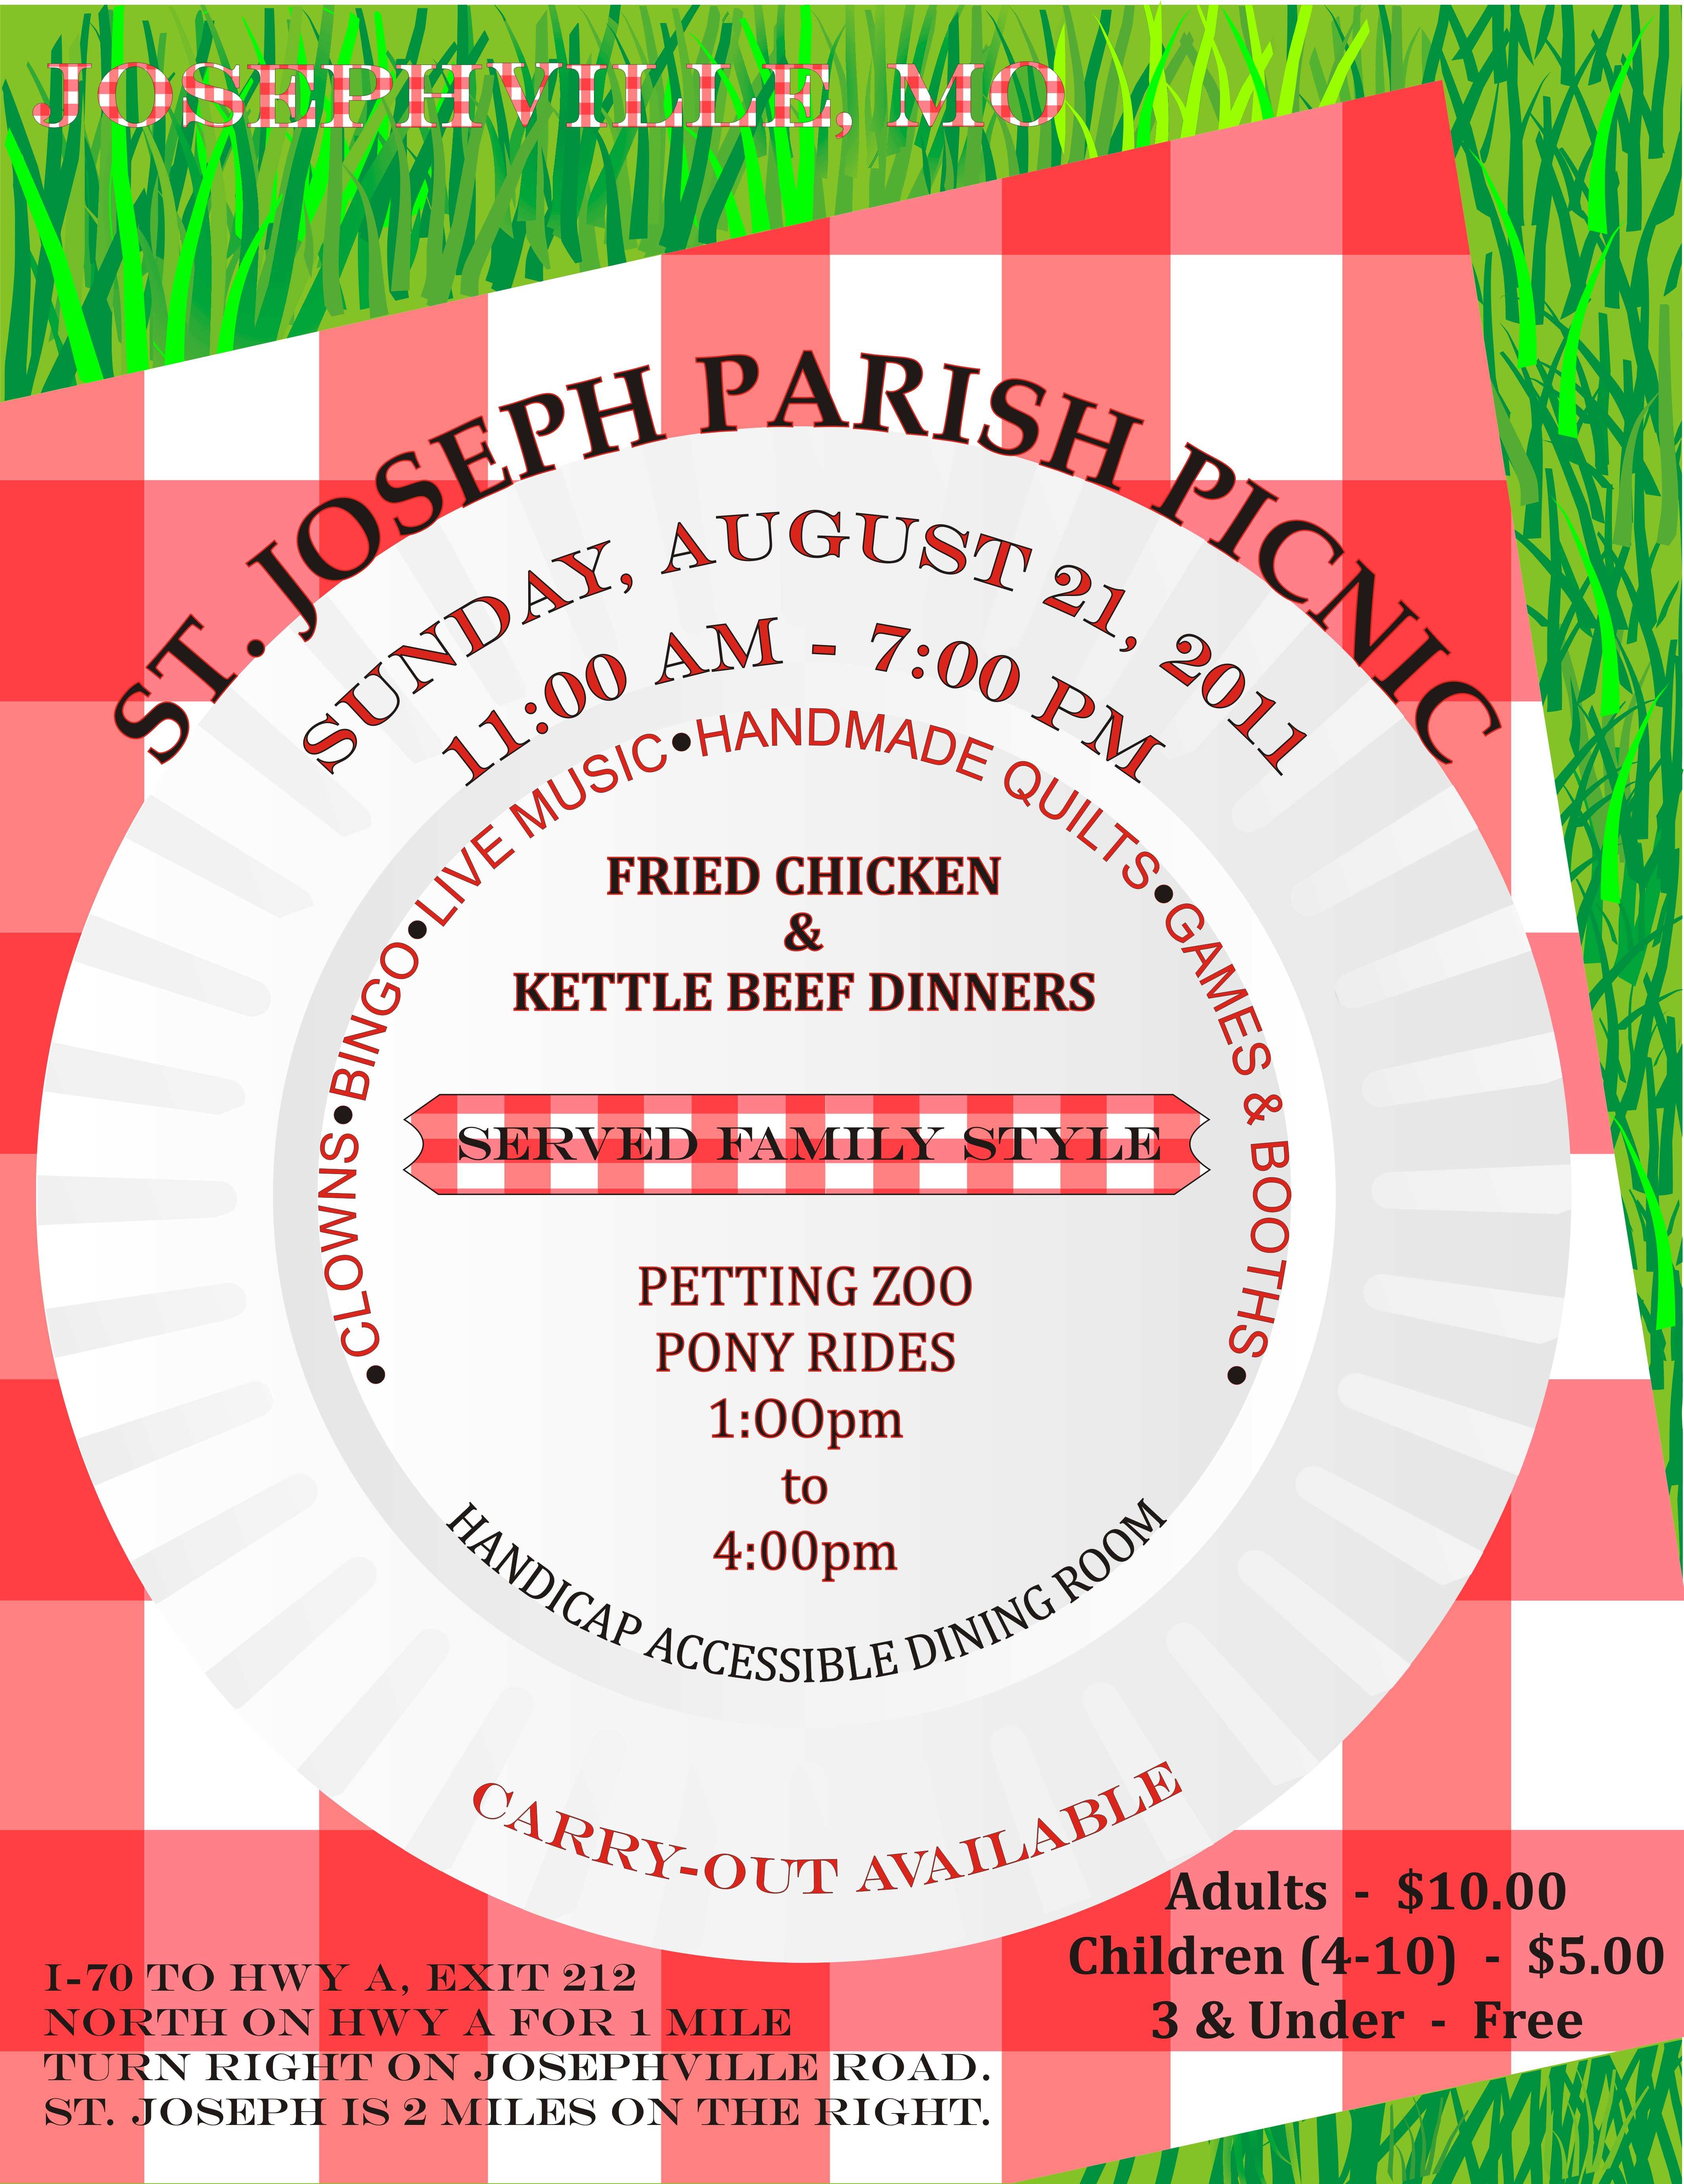 97 Customize Our Free Church Picnic Flyer Templates Maker by Church Picnic Flyer Templates